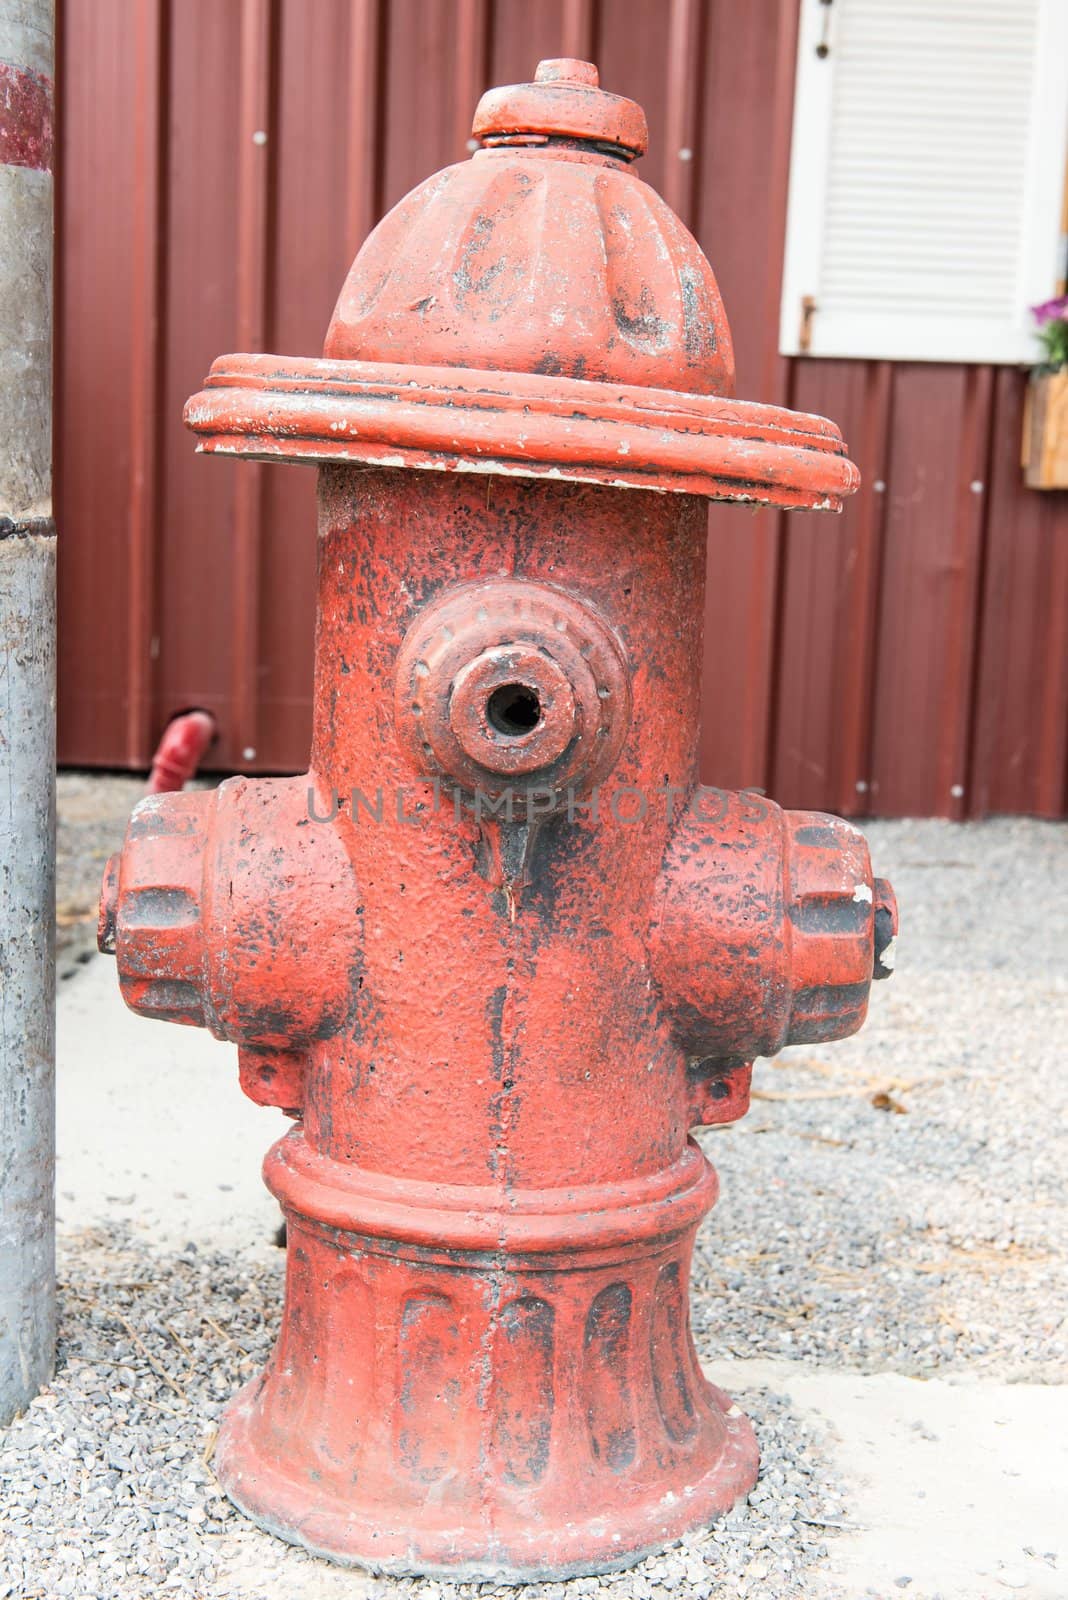 Rusty steel water pump outlet for fireman access by sasilsolutions